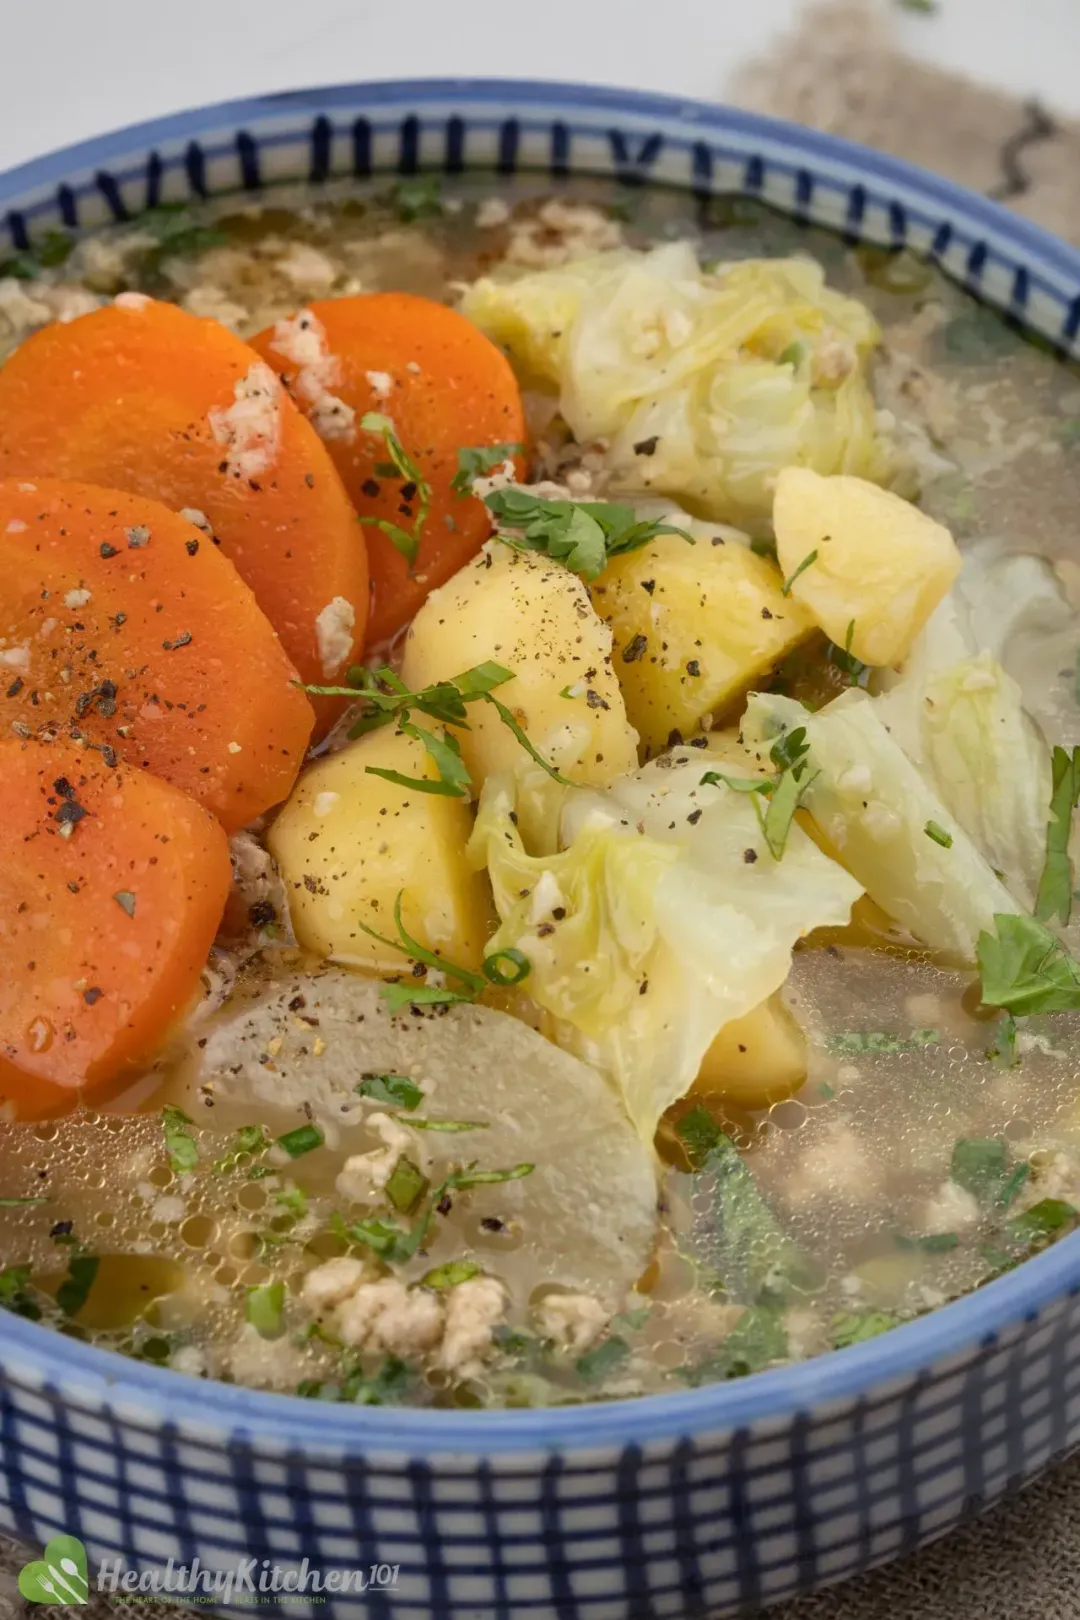 A close up shot of a soup bowl: sliced carrots, cabbage, chunked potatoes, and green onions over the top